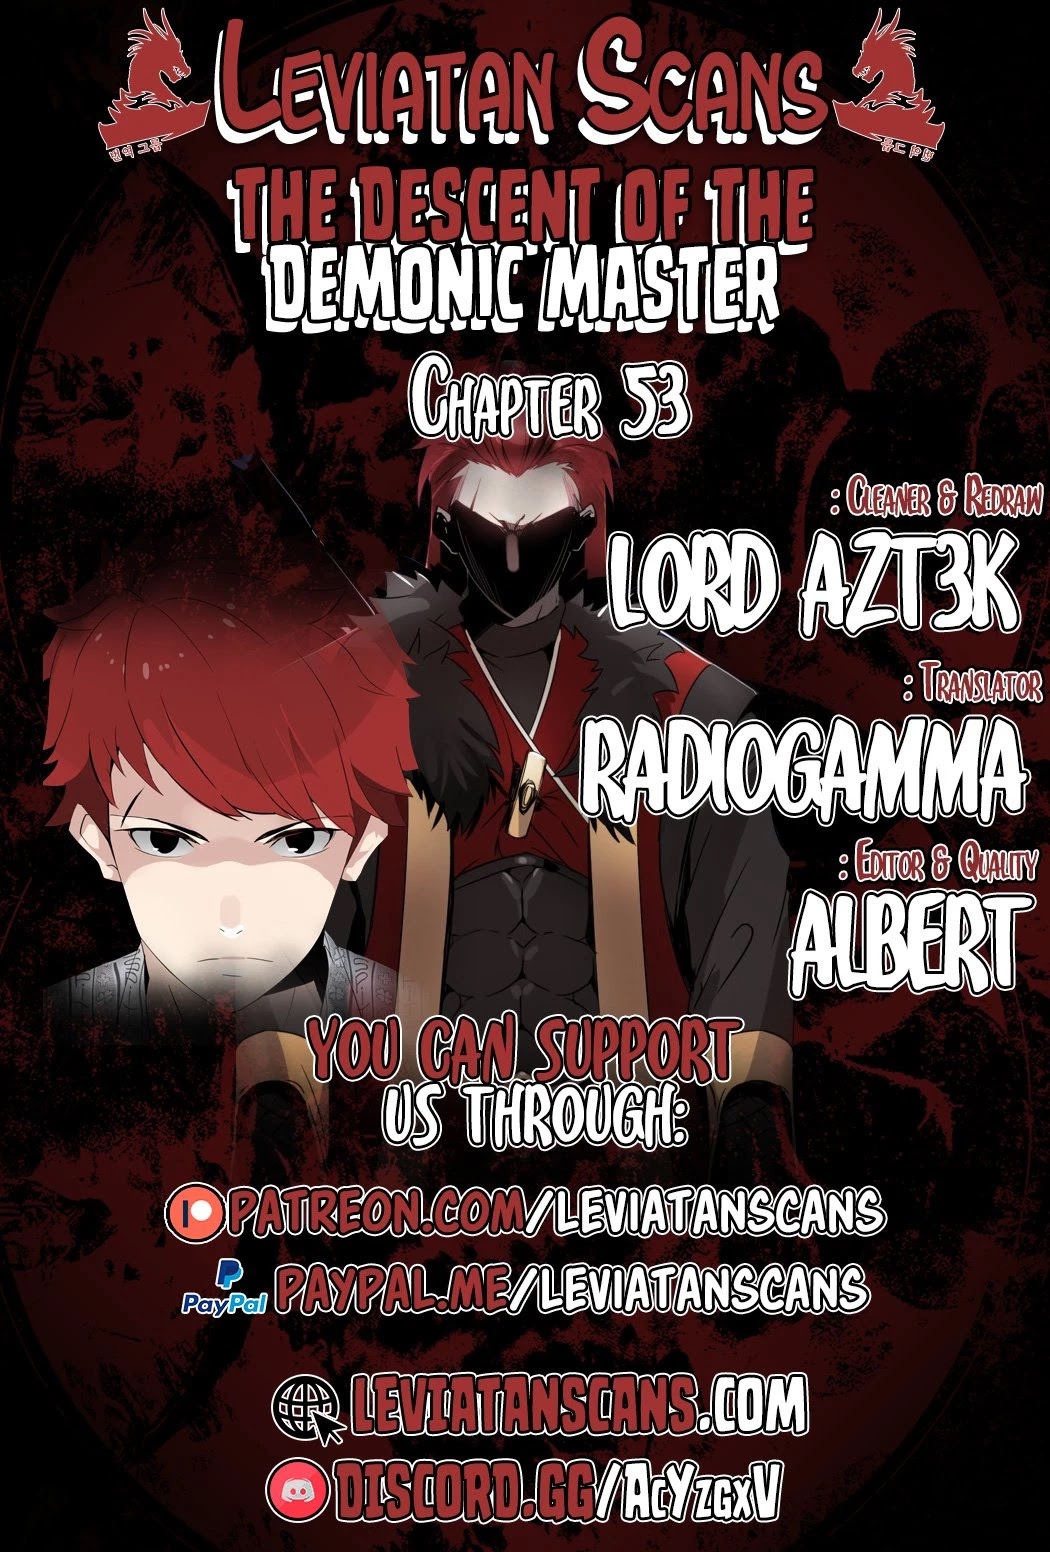 The Descent Of The Demonic Master Chapter 53